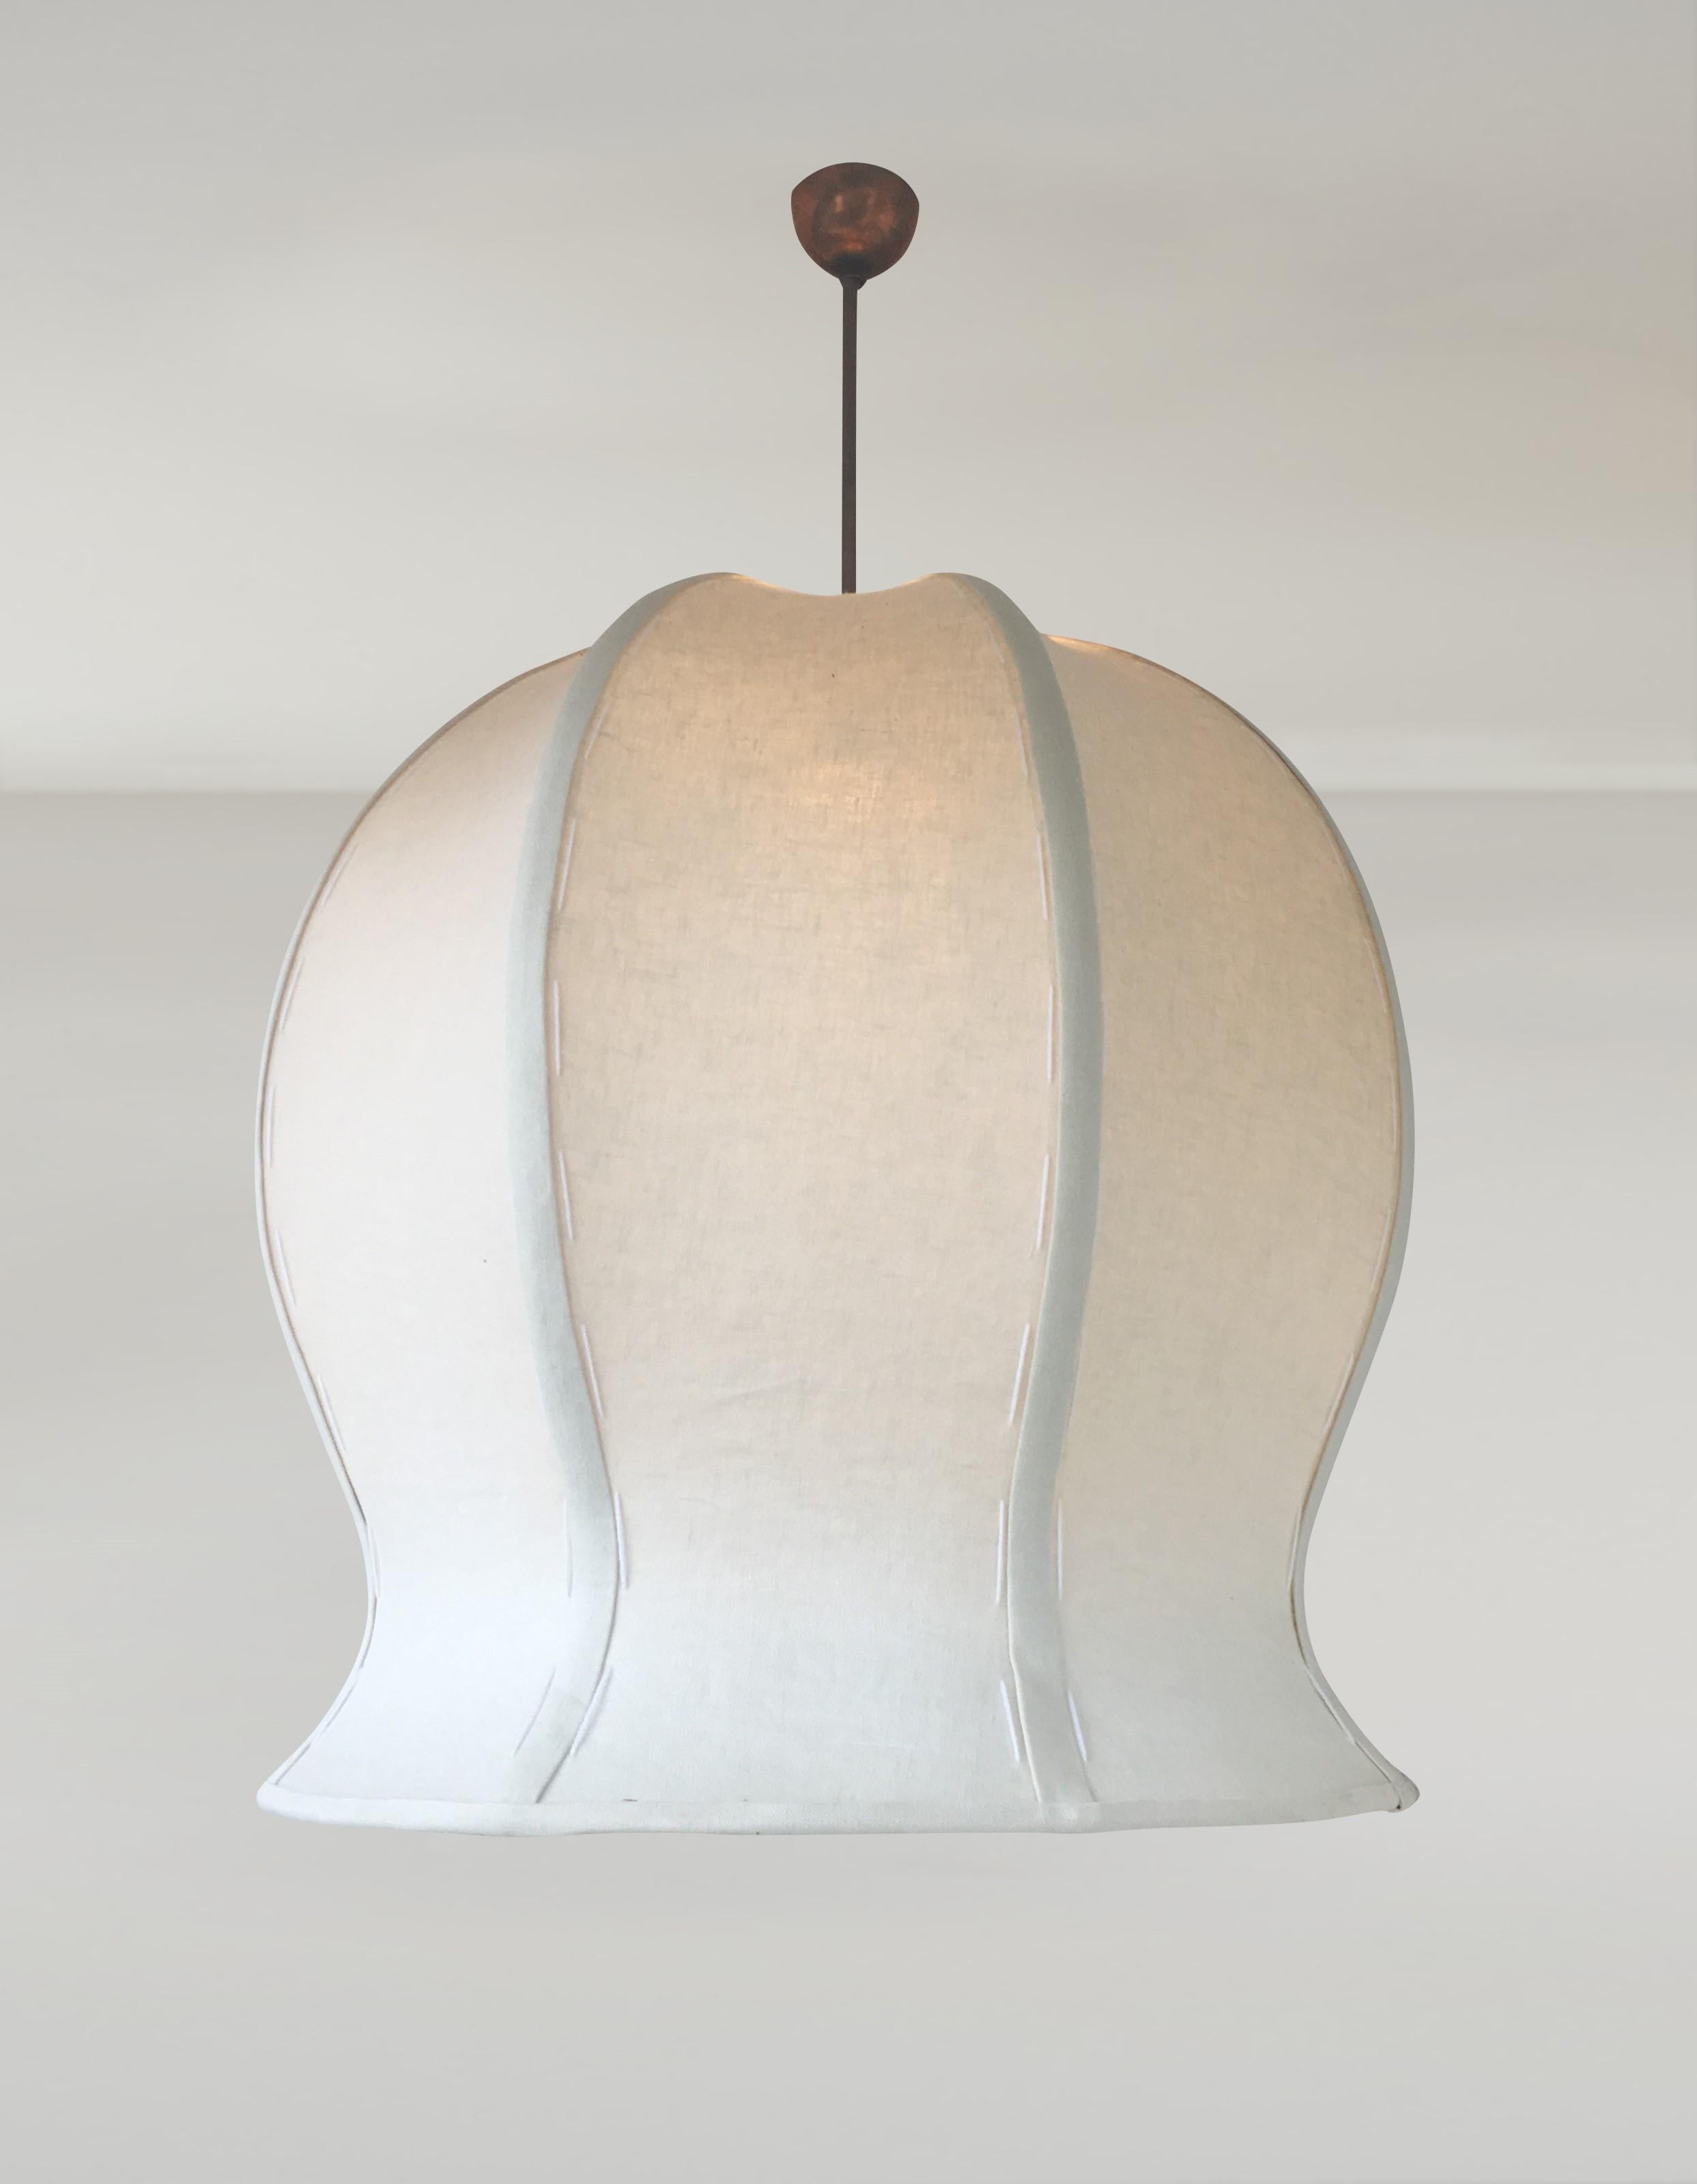 Artisanal Tulip 520 Pendant is custom made to order  Inspired by nature, this original sculptural, signature hand-stitched  Italian linen pendant lamp is a refined example of 21st century organic modern design. 
Tulip pendant 520 provides diffused